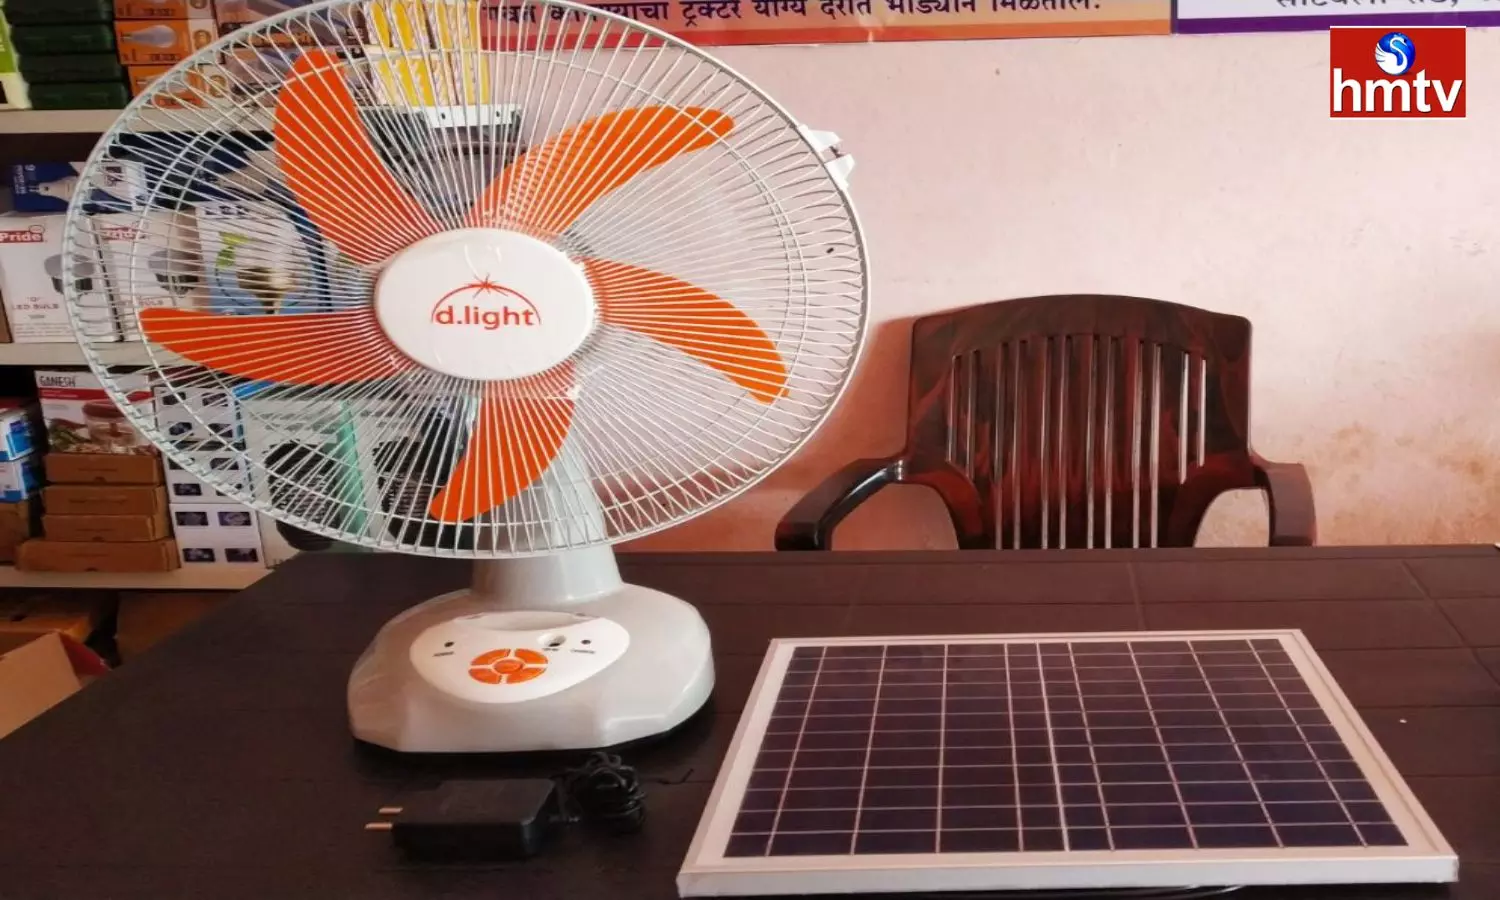 This Solar Fan Works Without Power Only 329 Price in Flipkart